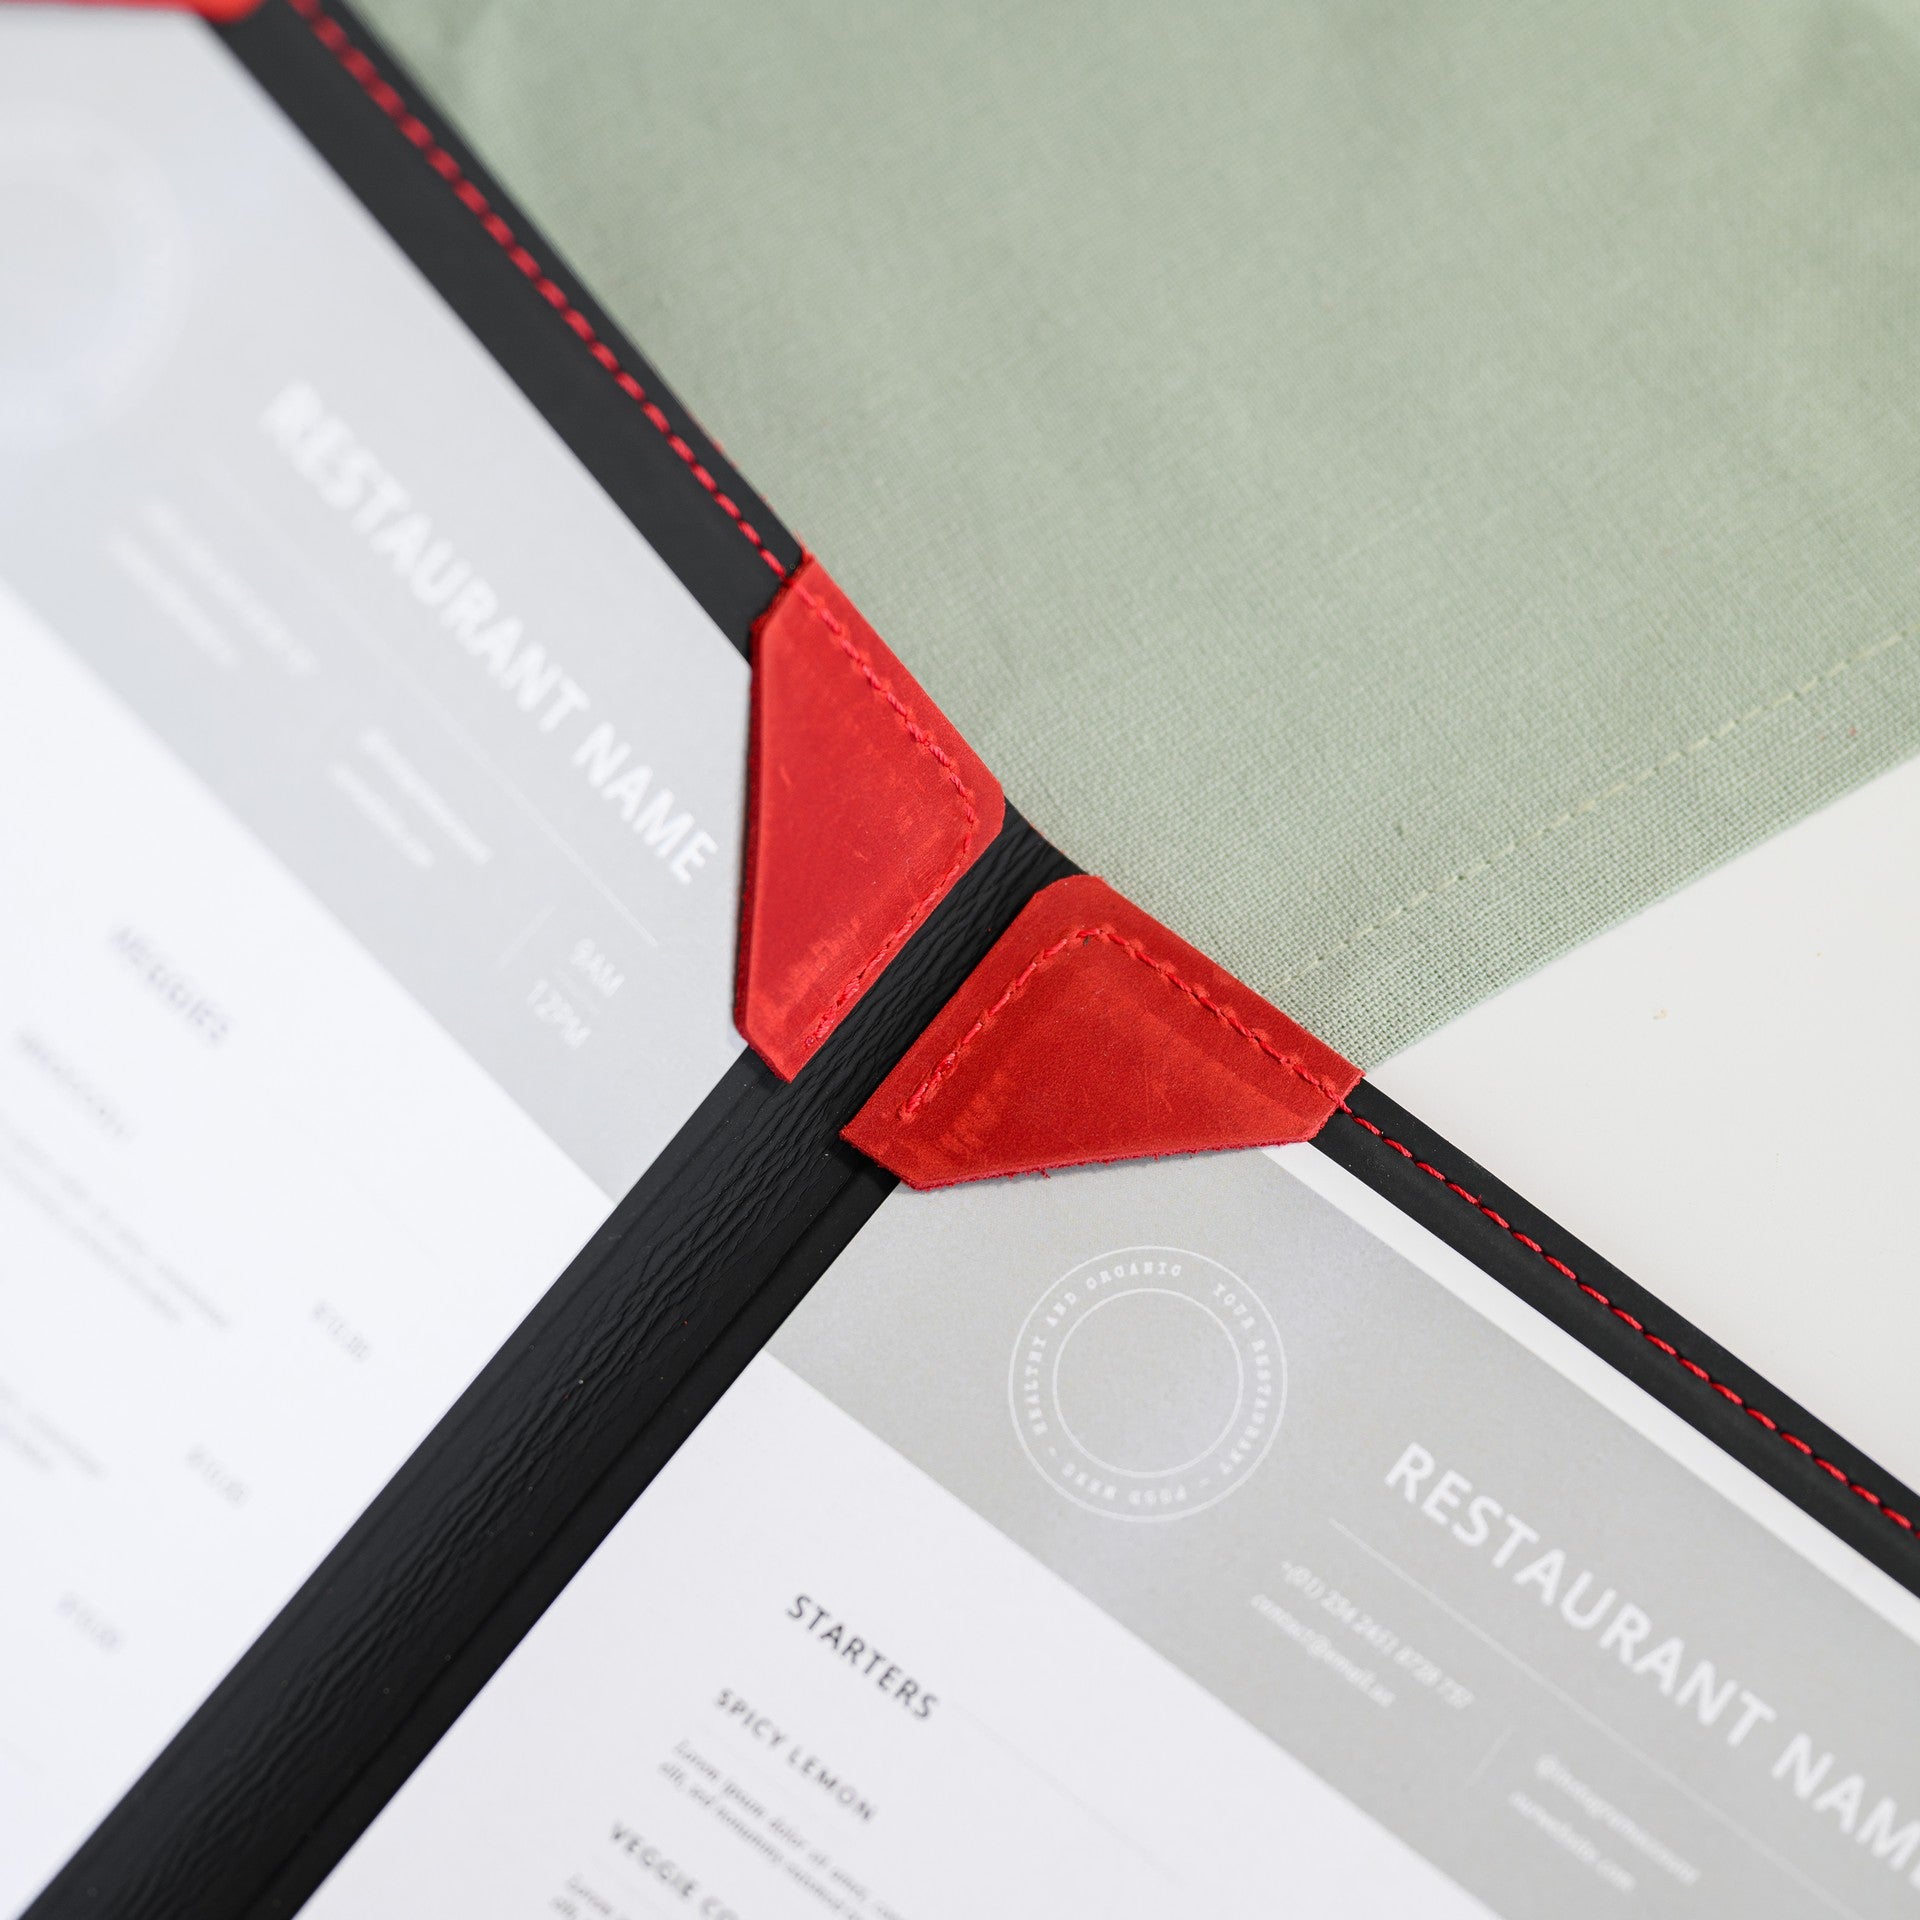 Stylish Leather Restaurant Menu Folder, adding a touch of refinement to your dining establishment.